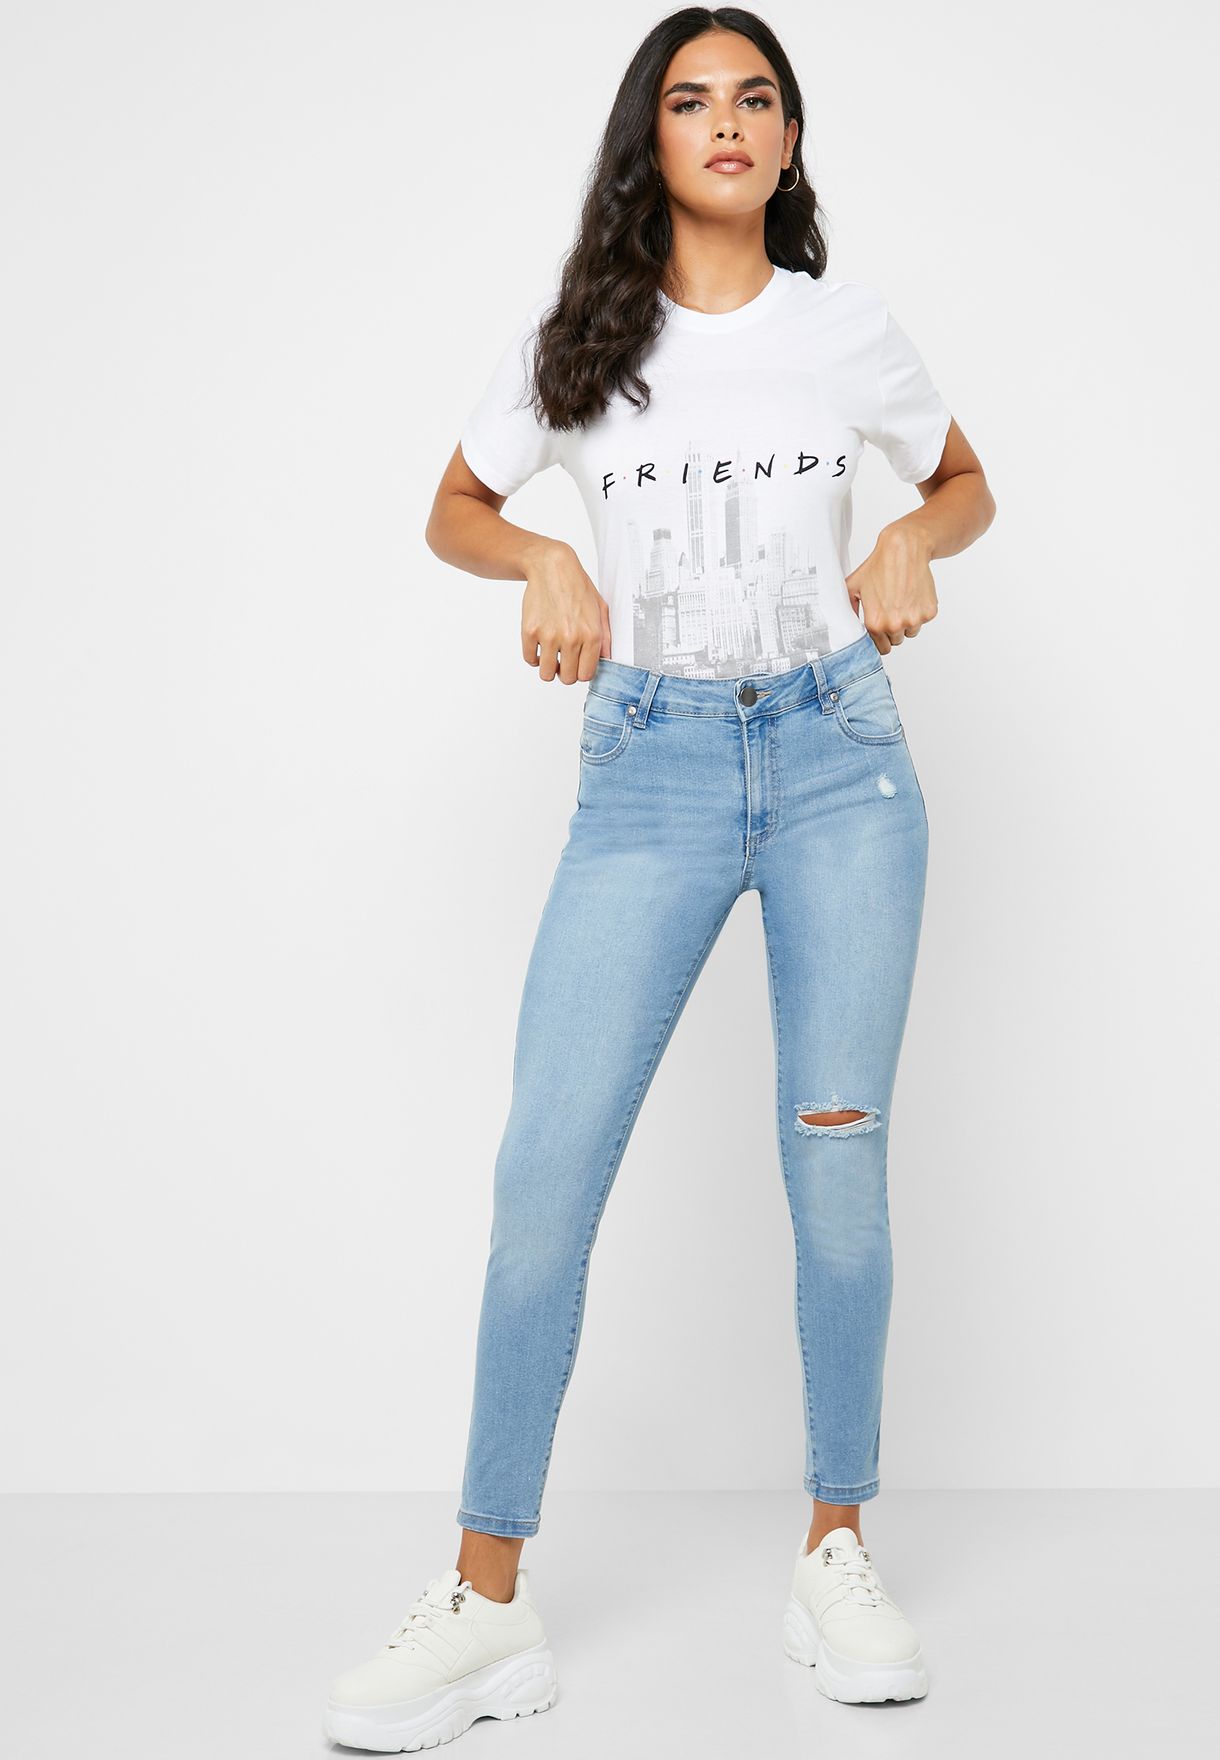 knee ripped jeans womens